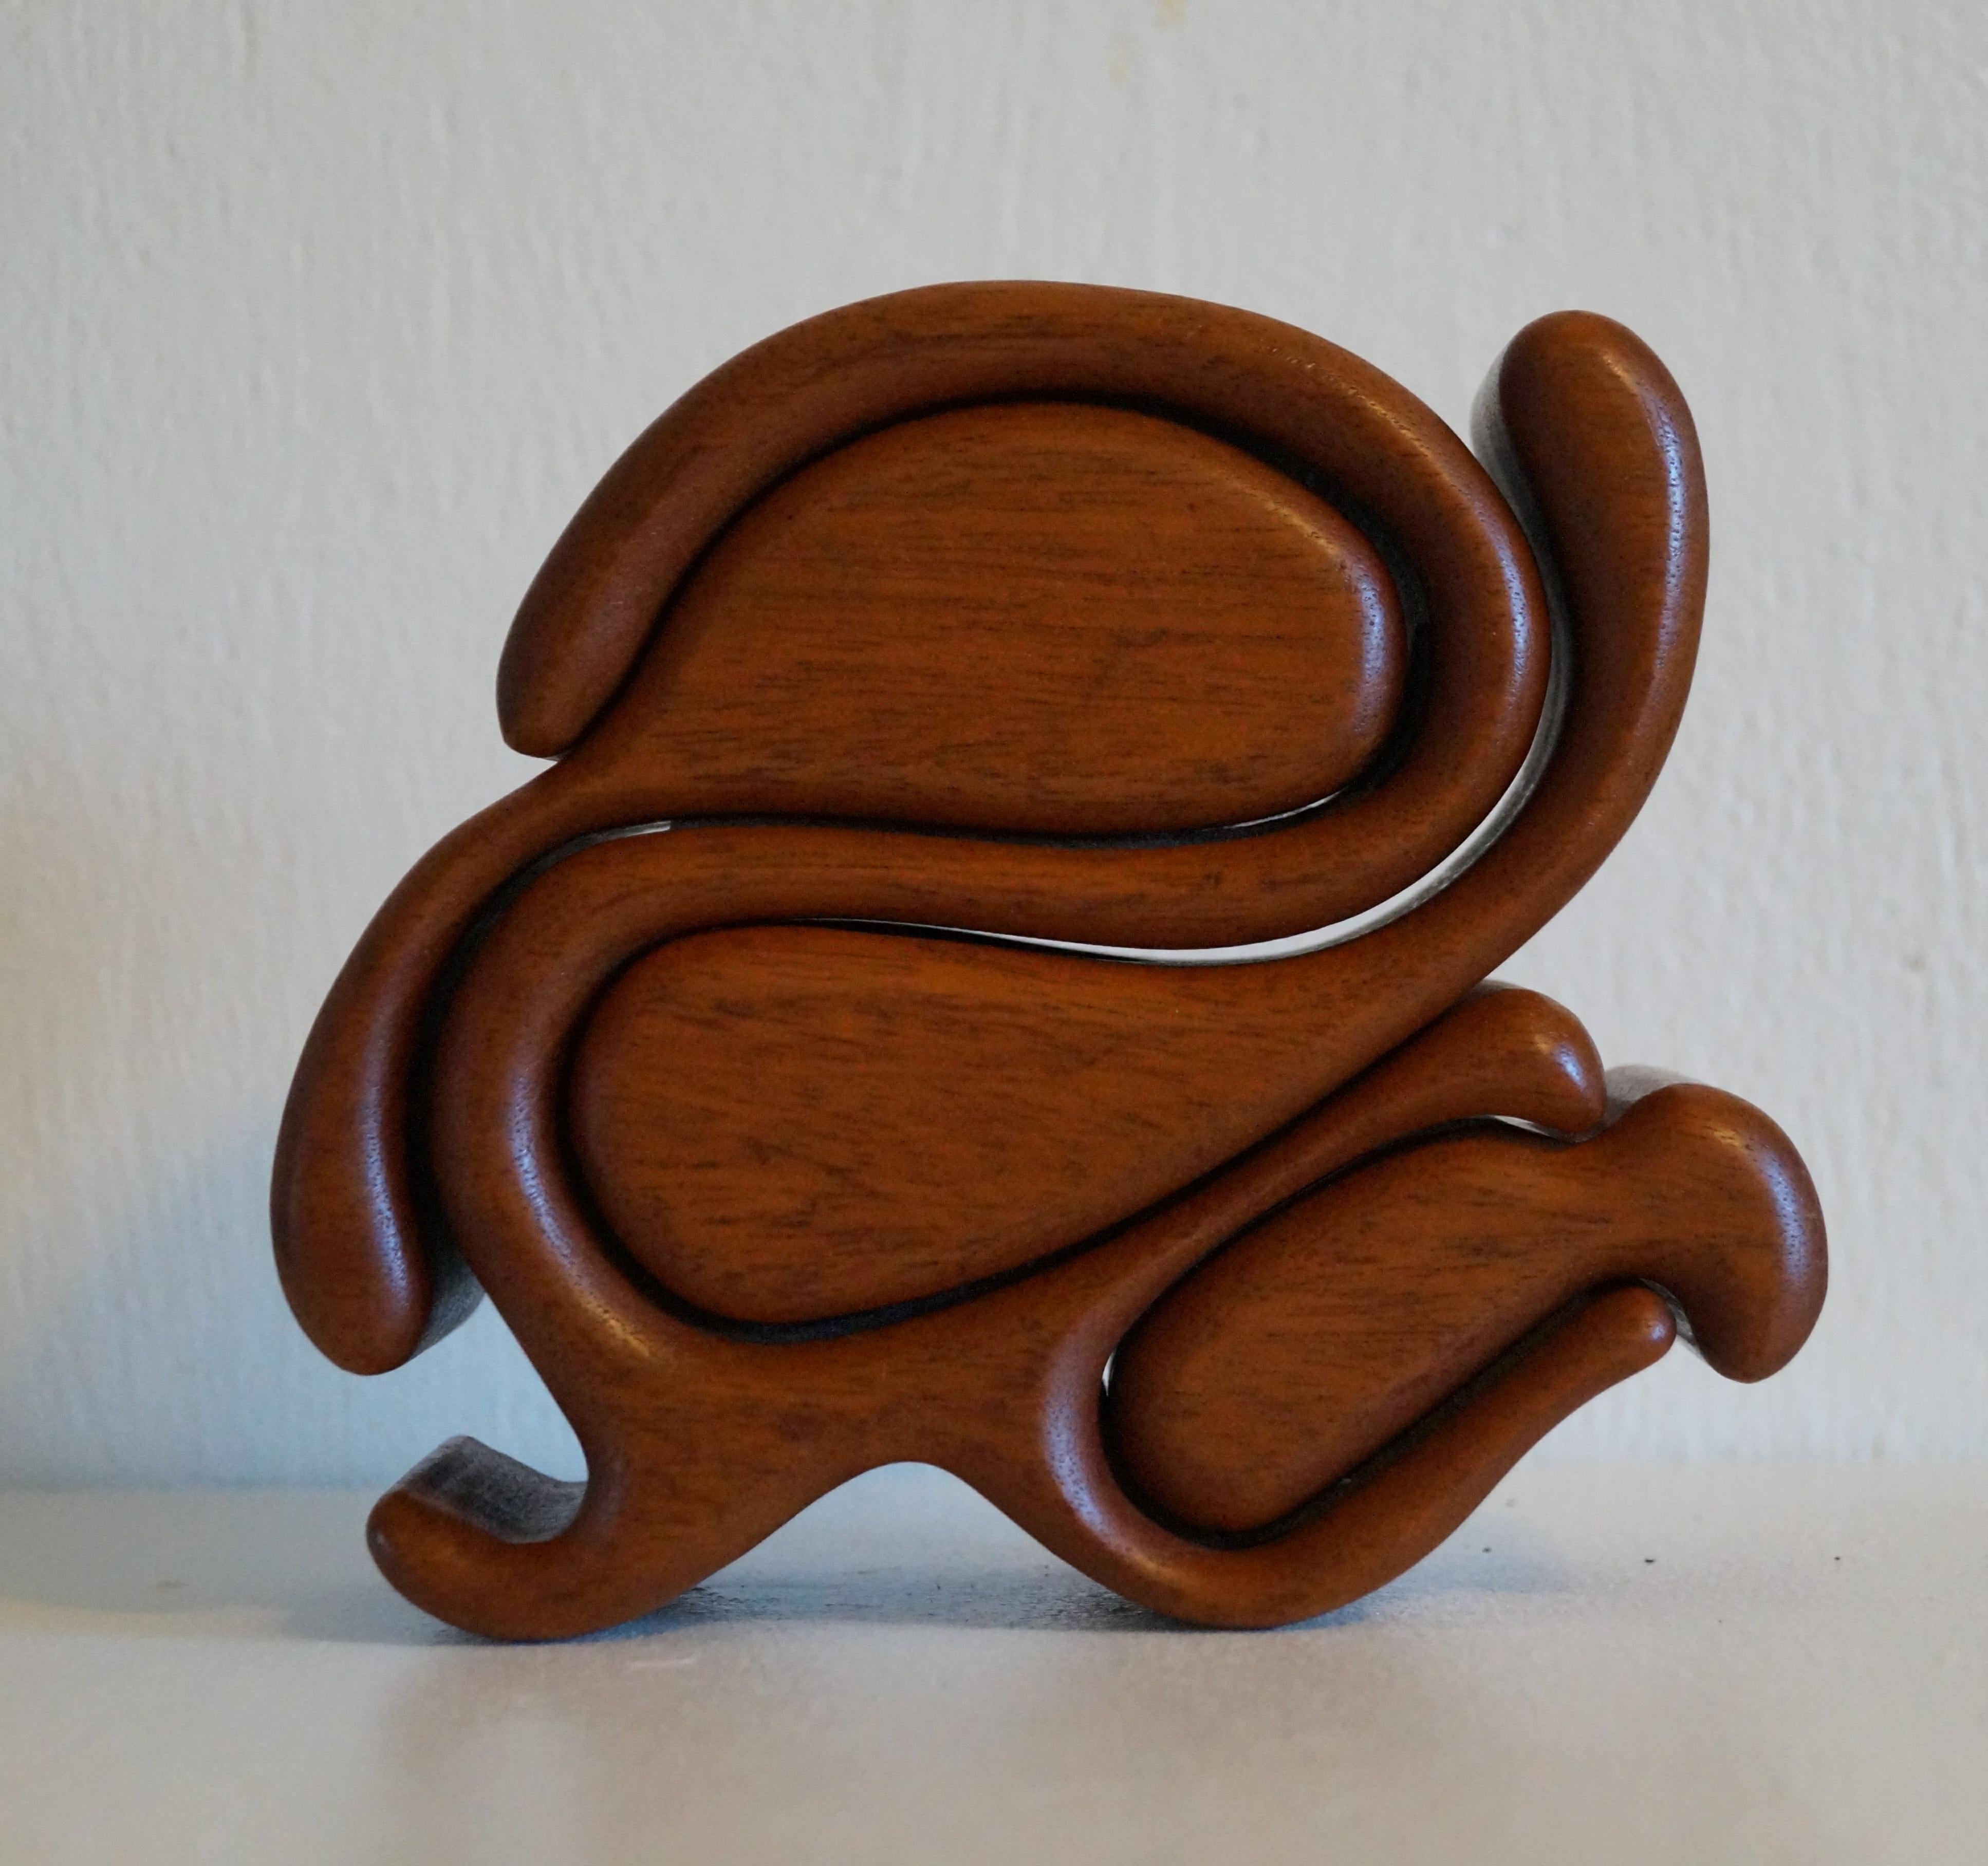 Sculptural Carved Teak Scandinavian Modern Wood Puzzle Box Richard Rothbard . Hidden 3 compartments with insert protectors for jewelry , small storage pieces , etc .  The mini pieces slide out and have protective pieces on the main piece , to